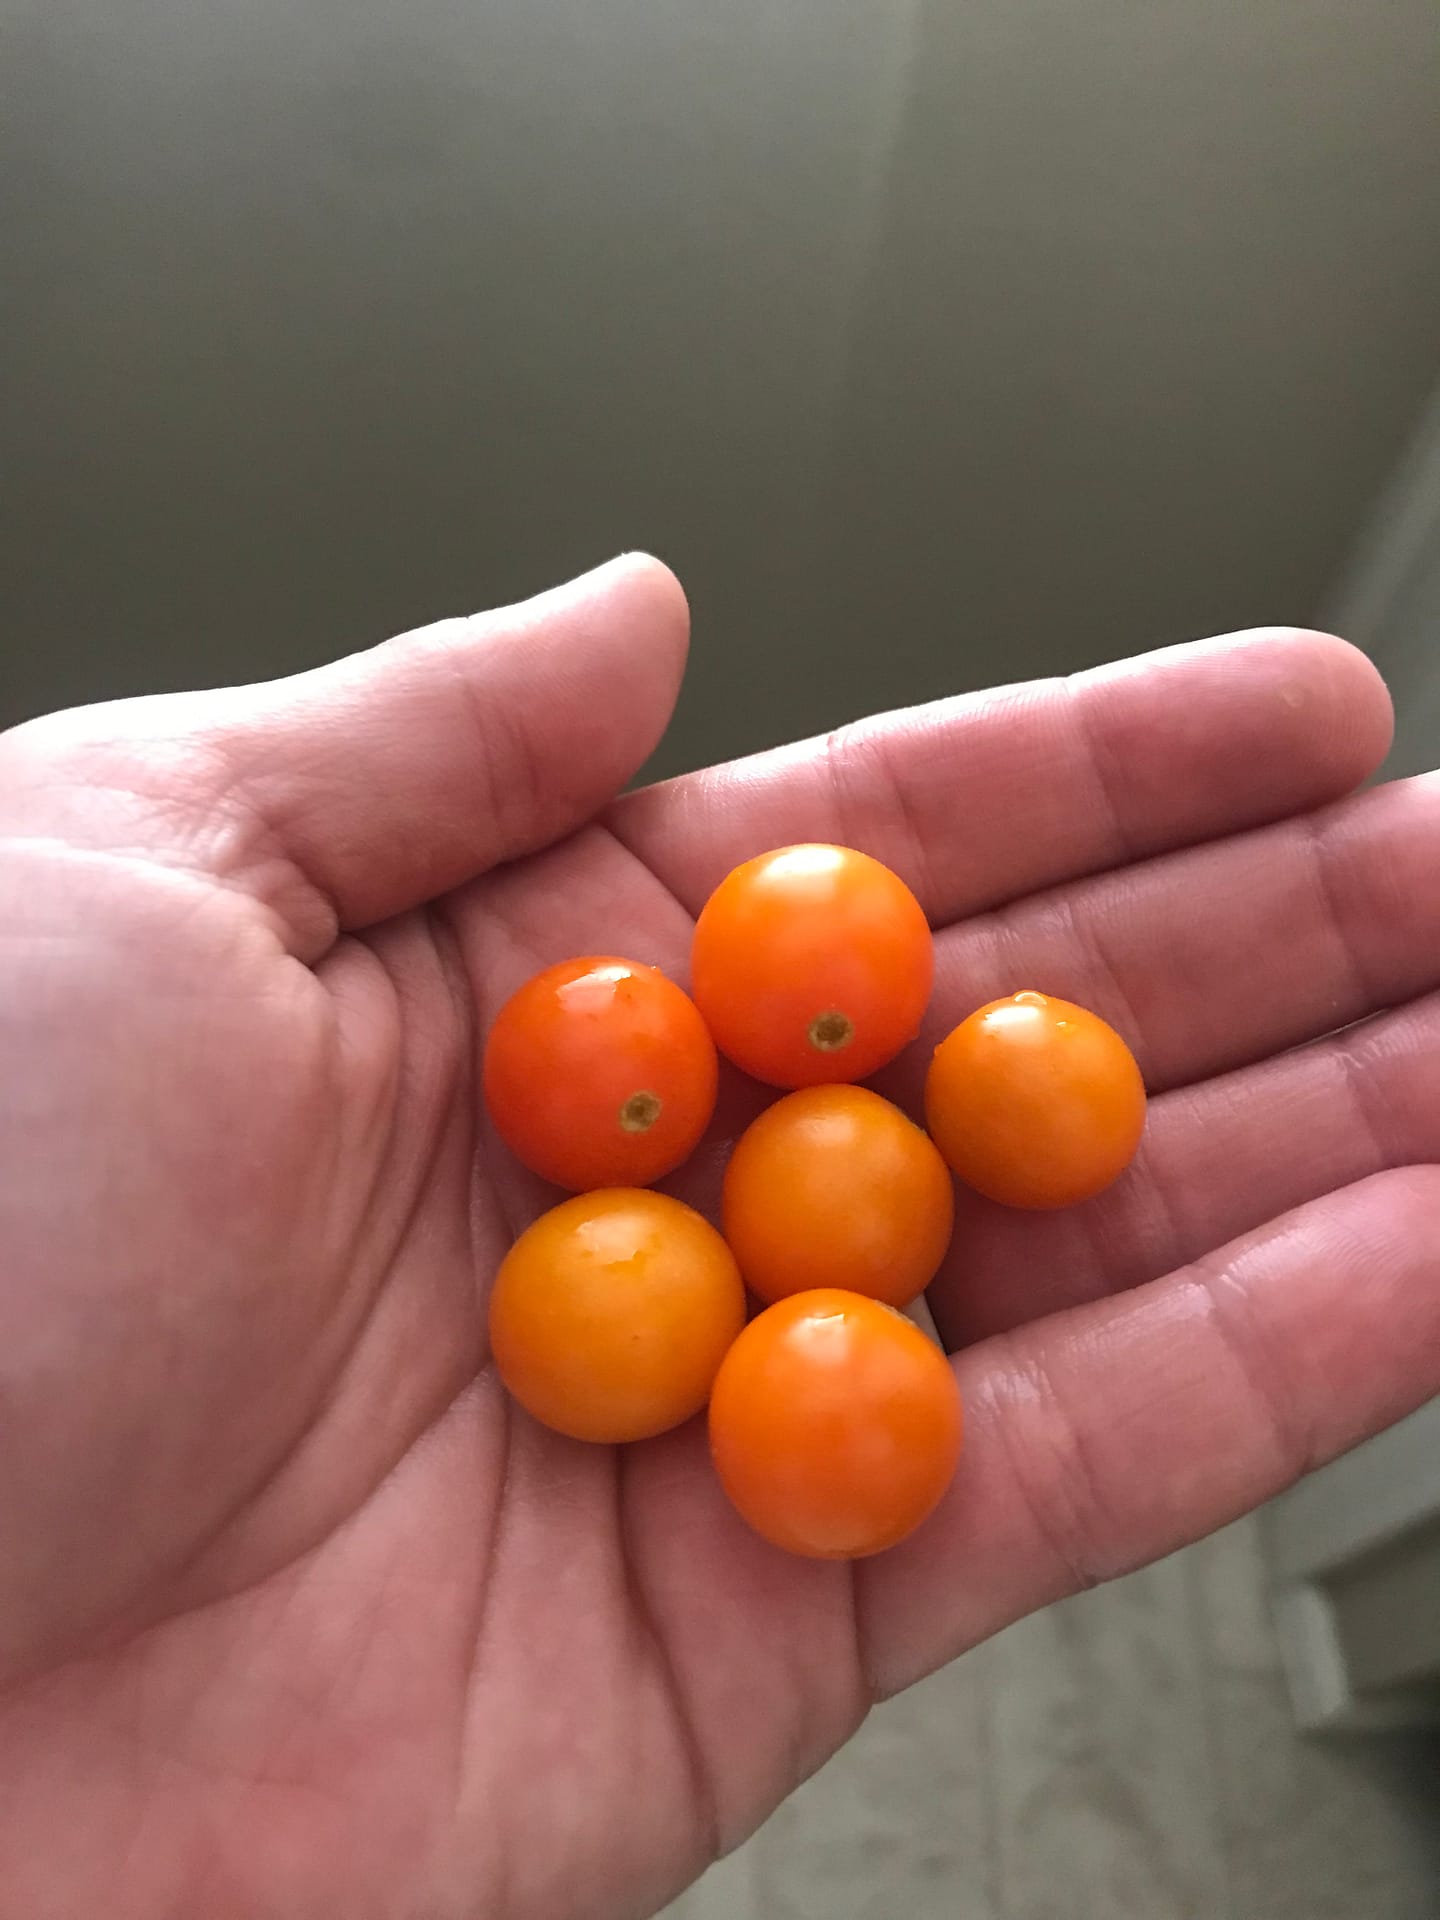 Angie's recipe garden shows off 6 orange cherry tomatoes she harvested